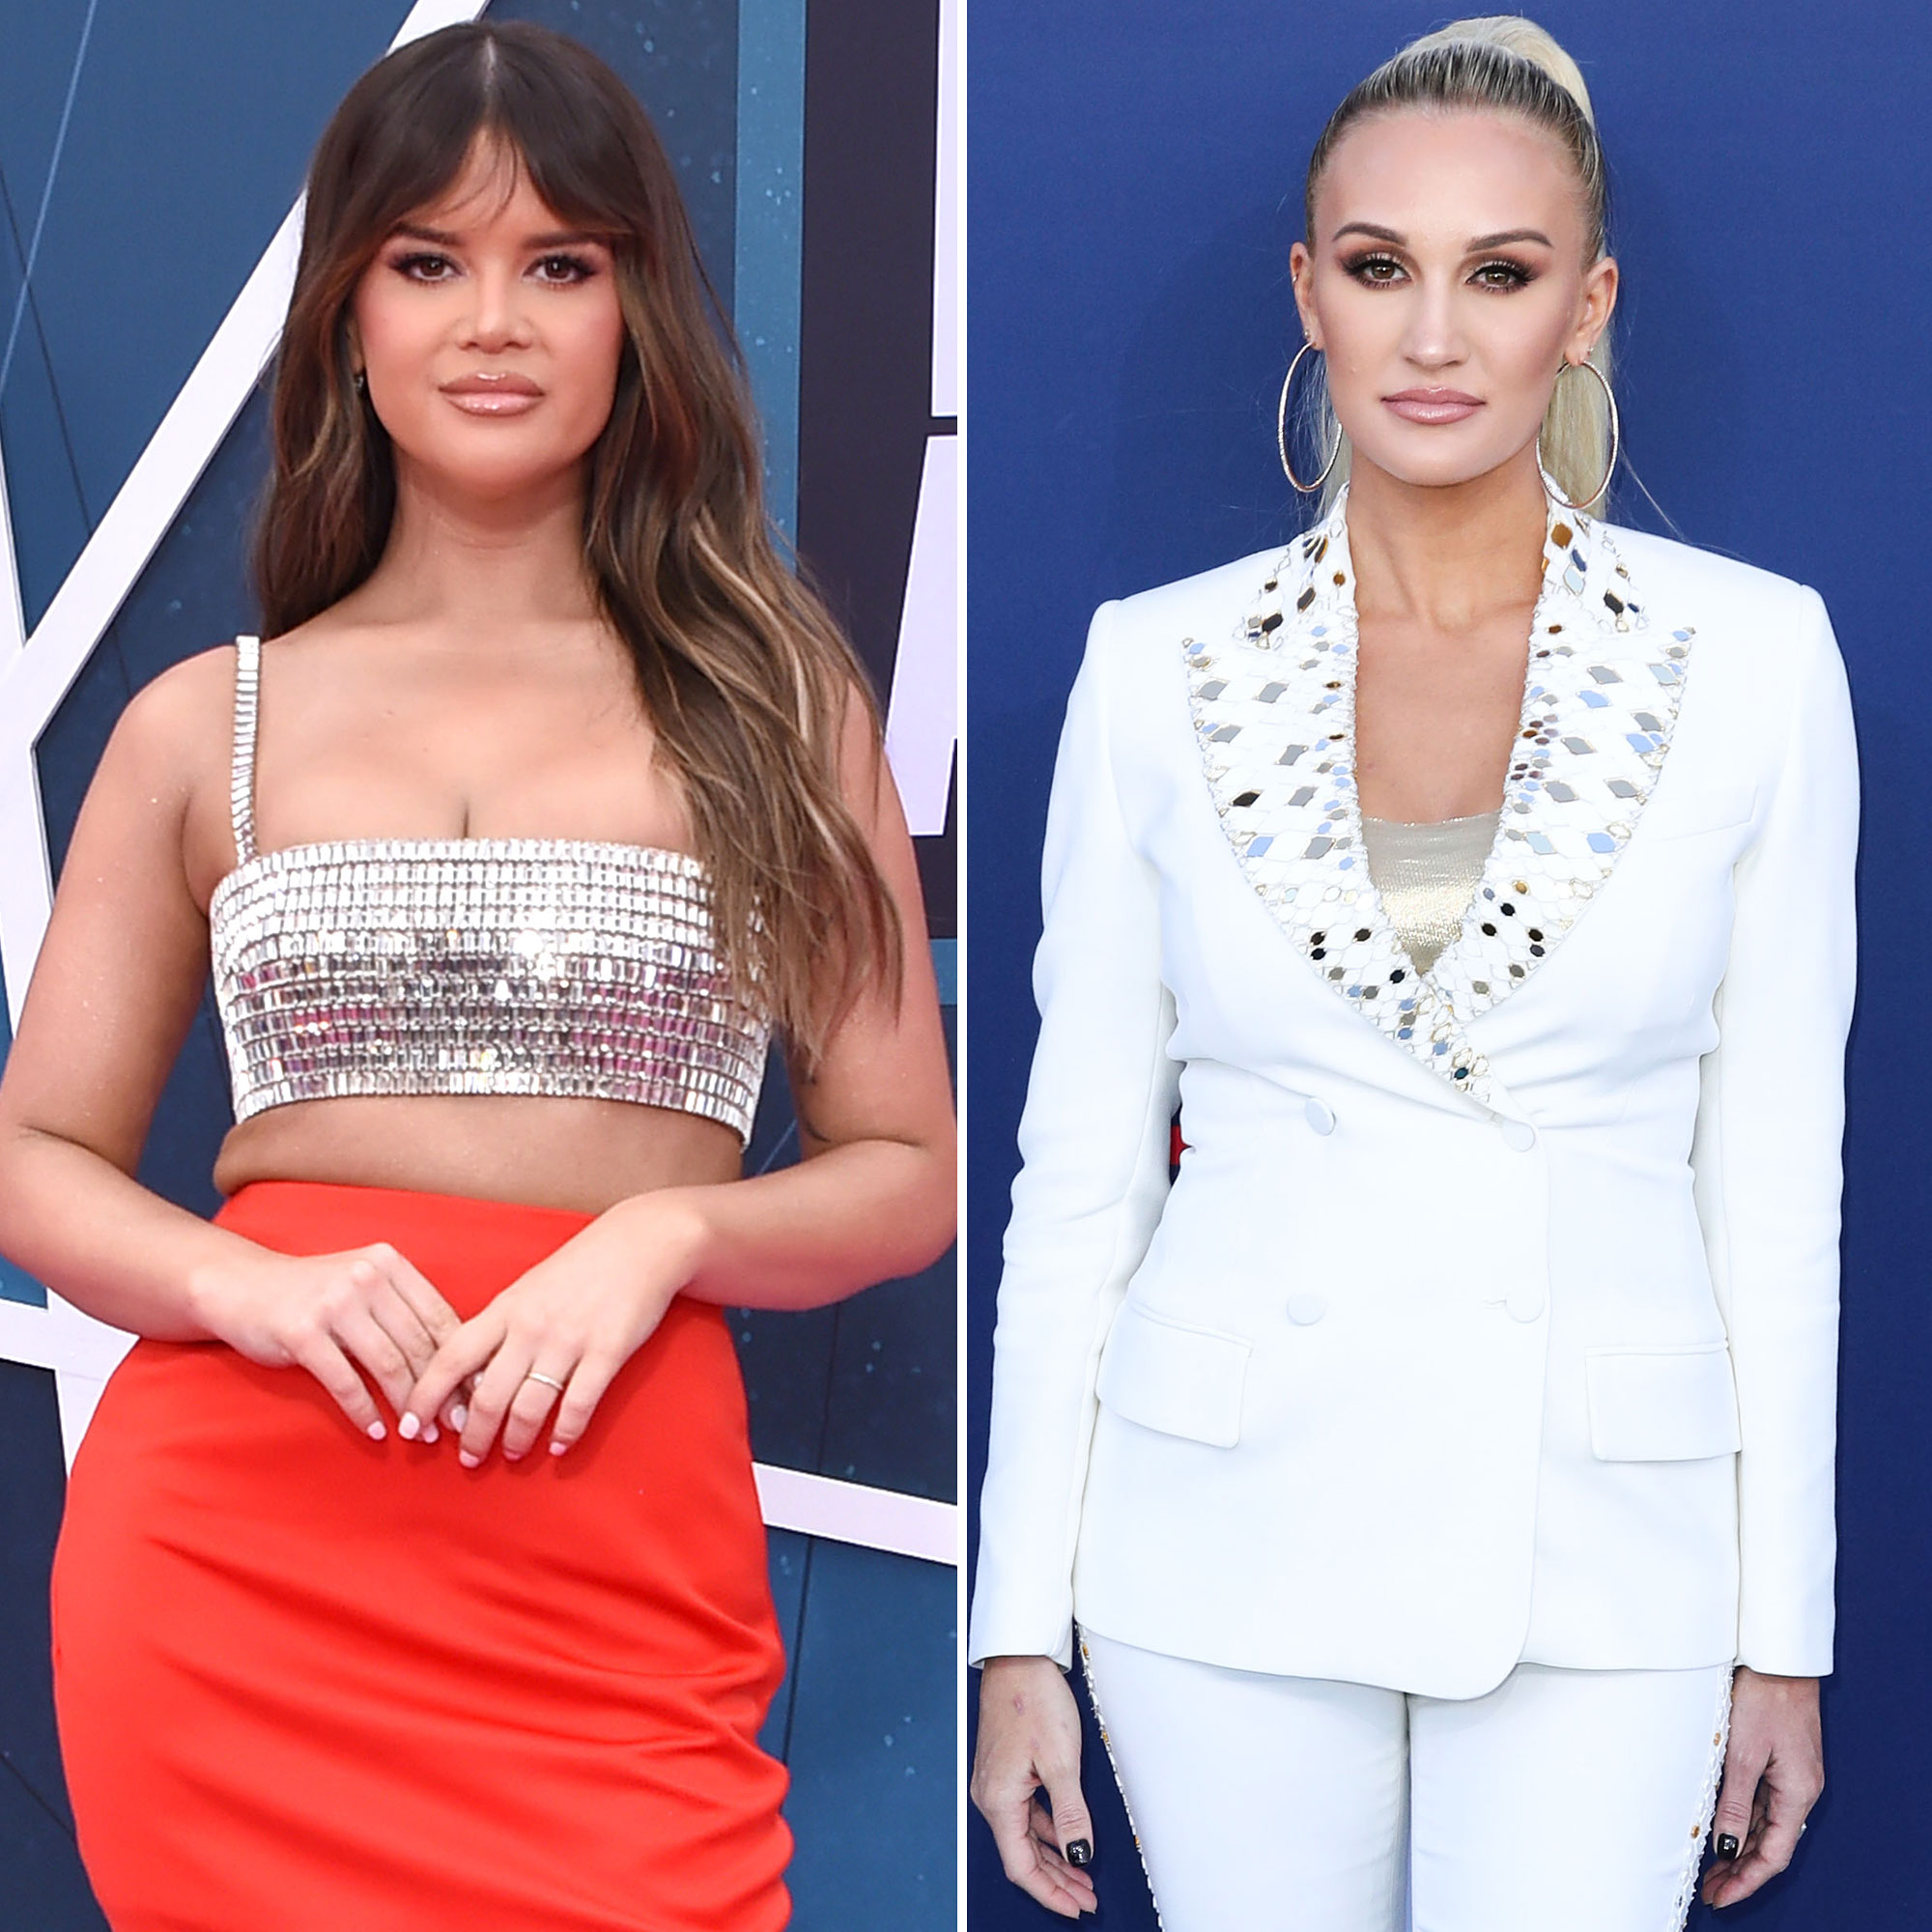 What to Know About Maren Morris, Brittany Aldean's Online Feud